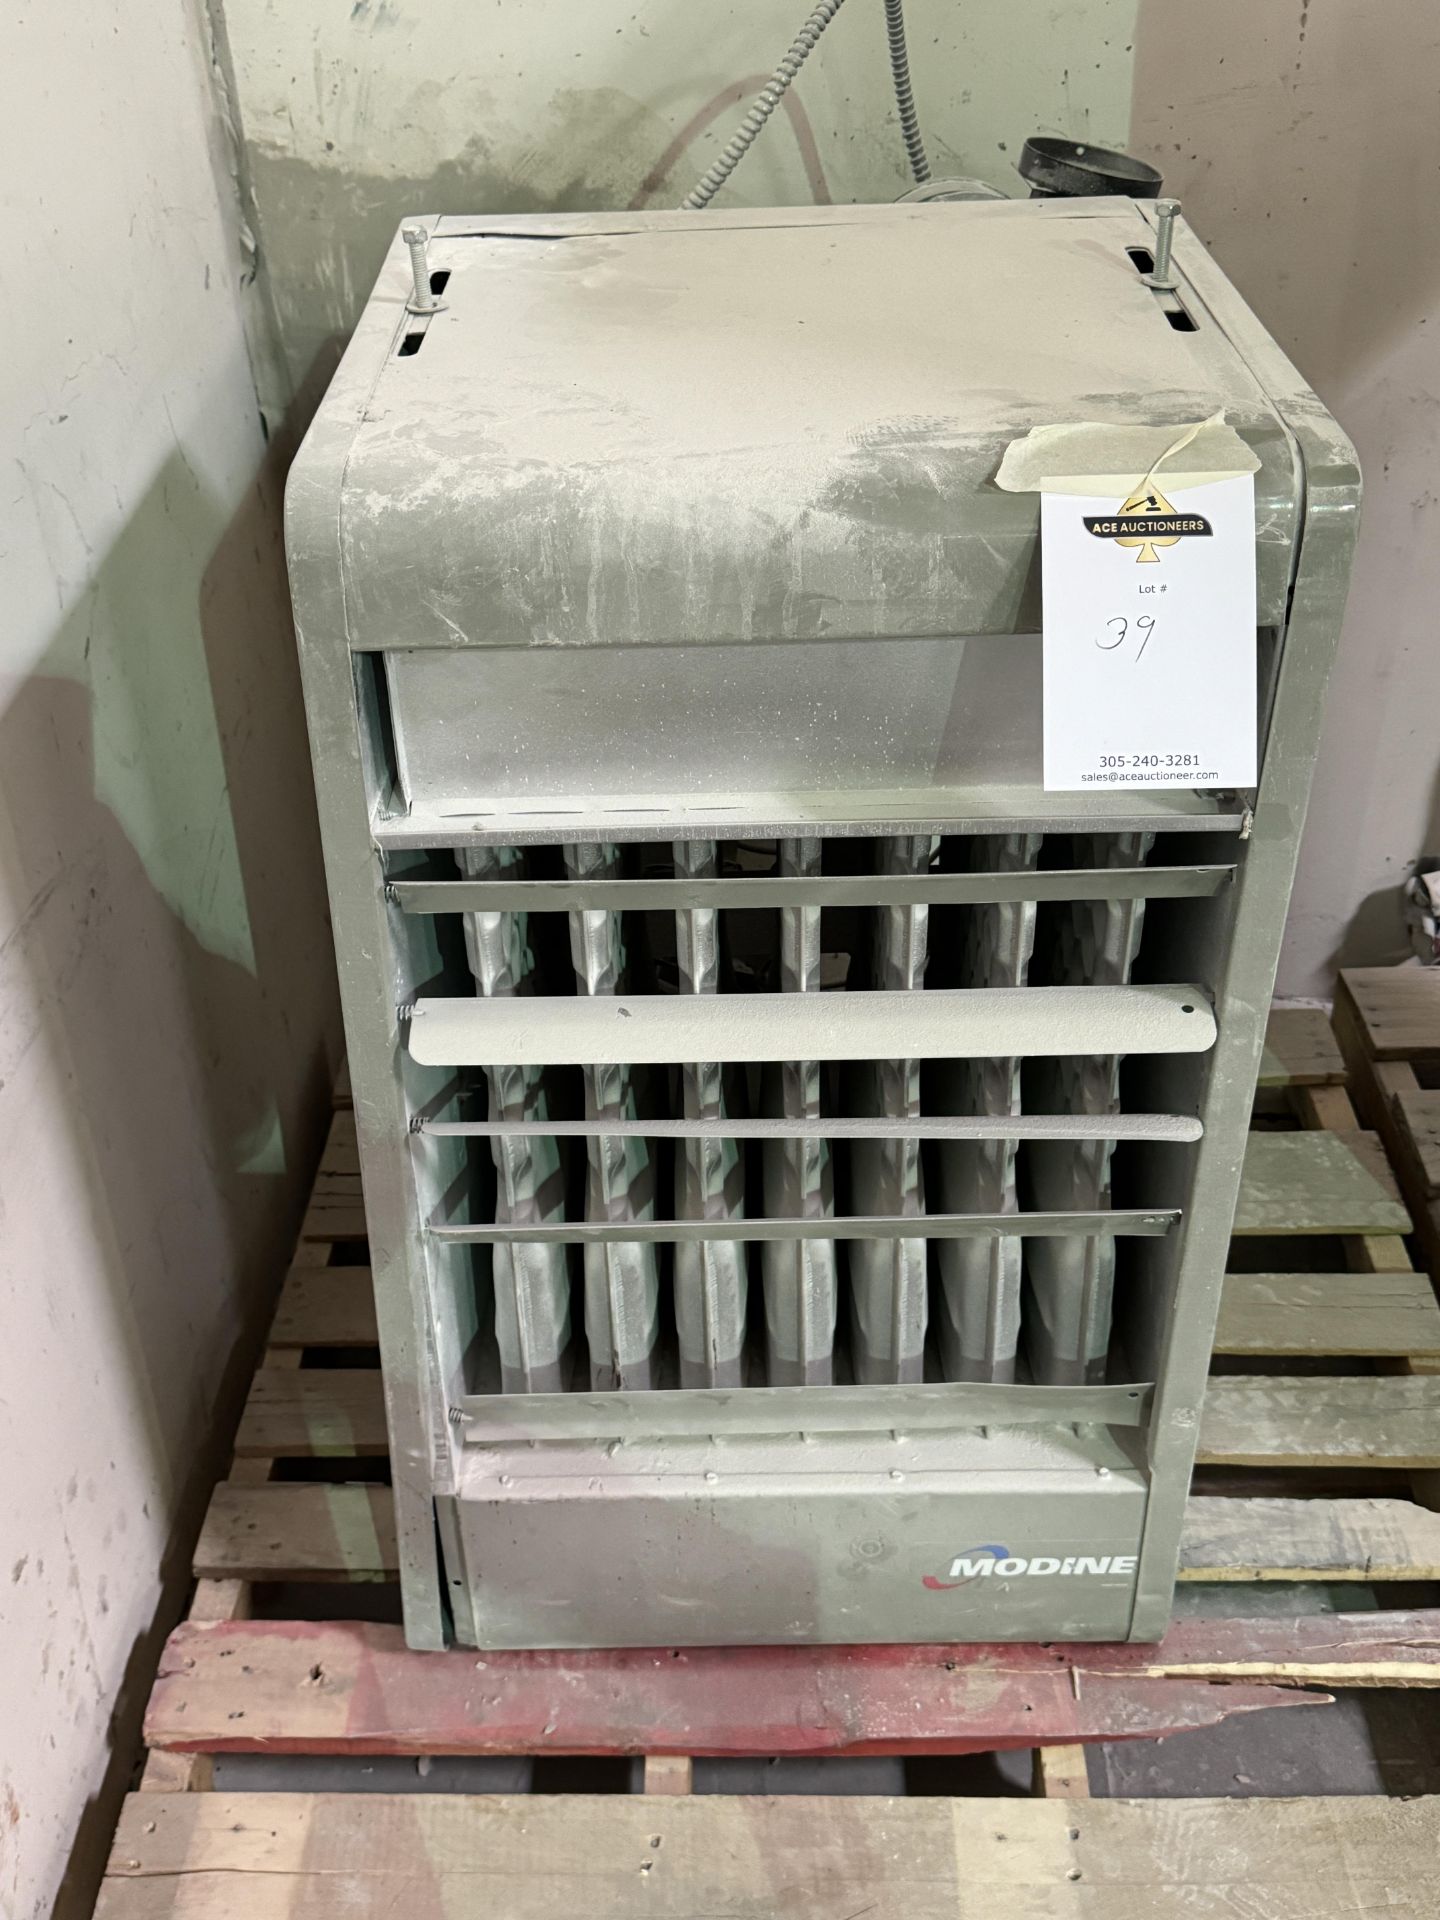 MODINE INDUSTRIAL HEATER SYSTEM